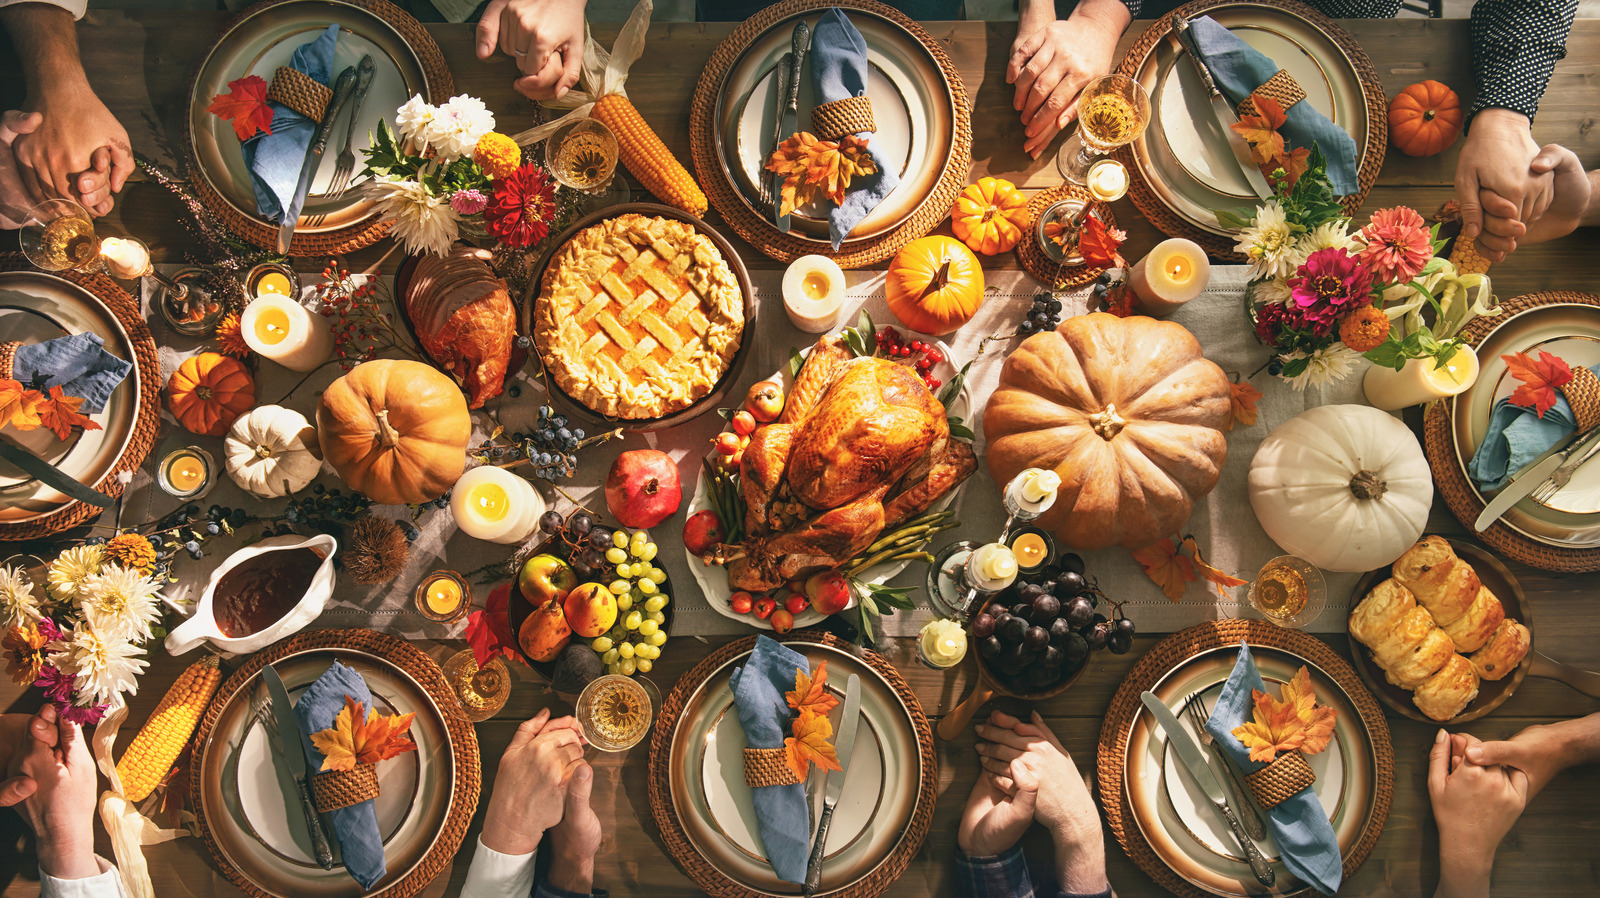 You Can Order Your Entire Thanksgiving Dinner Online From These Retailers